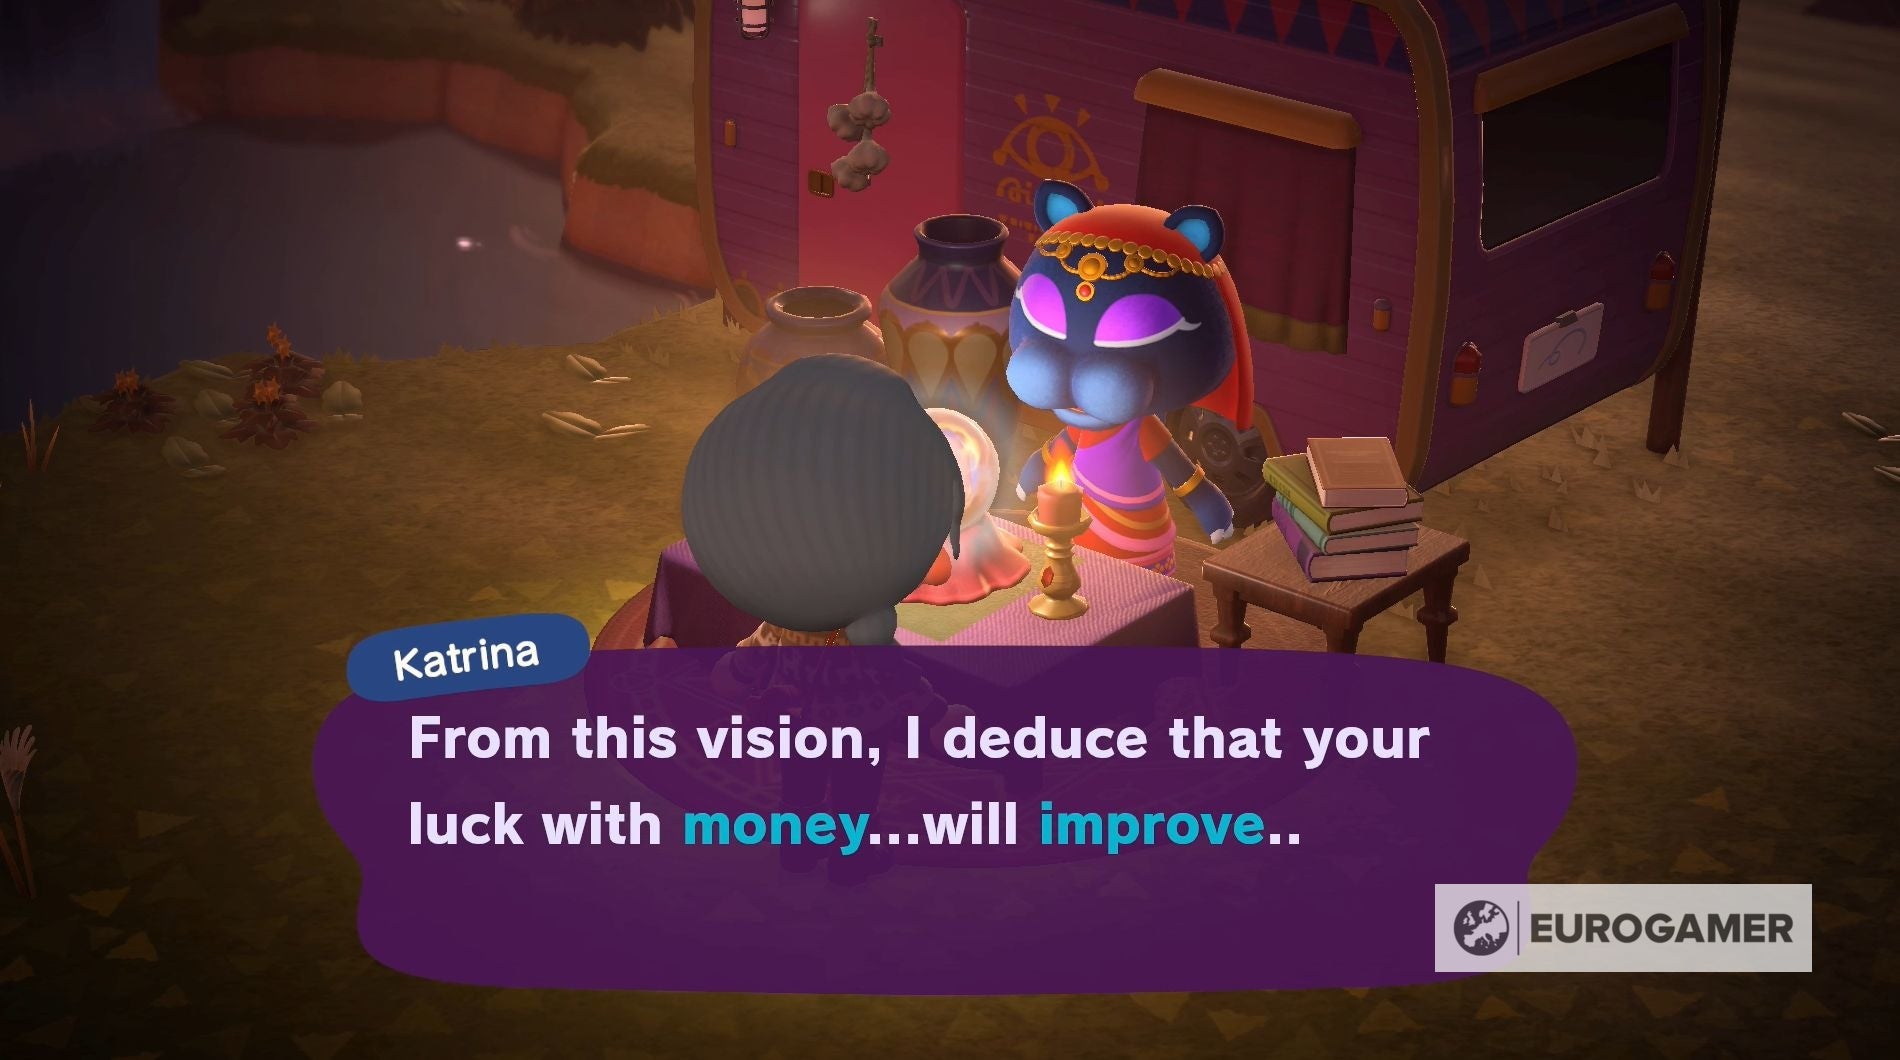 Animal Crossing Katrina and luck: How to get Katrina, Katrina's fortunes  and luck in New Horizons explained 